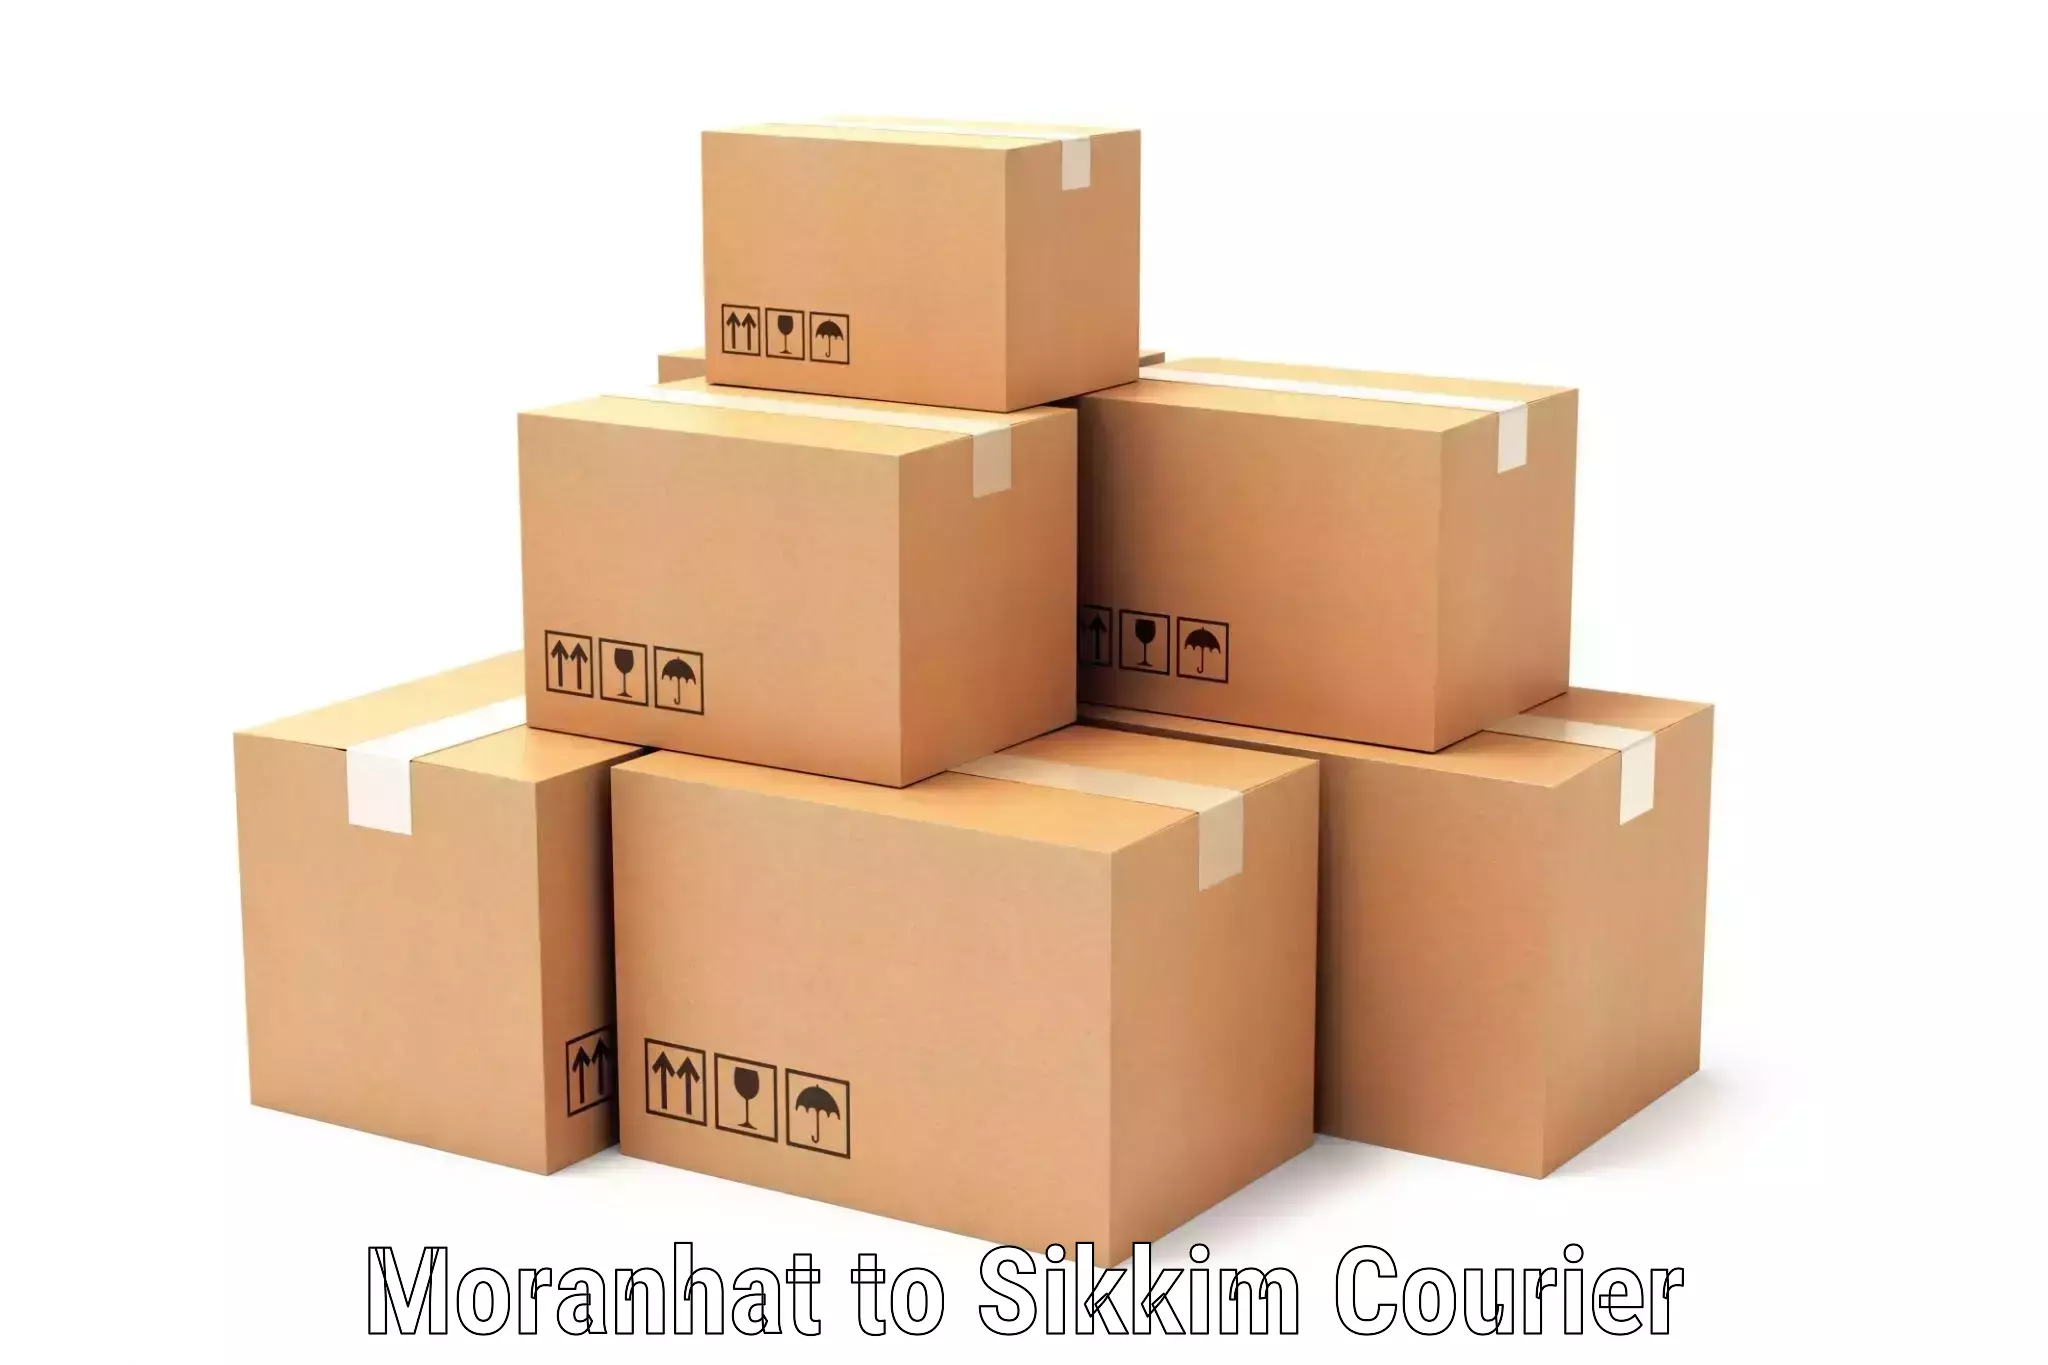 Custom courier packages Moranhat to Pelling